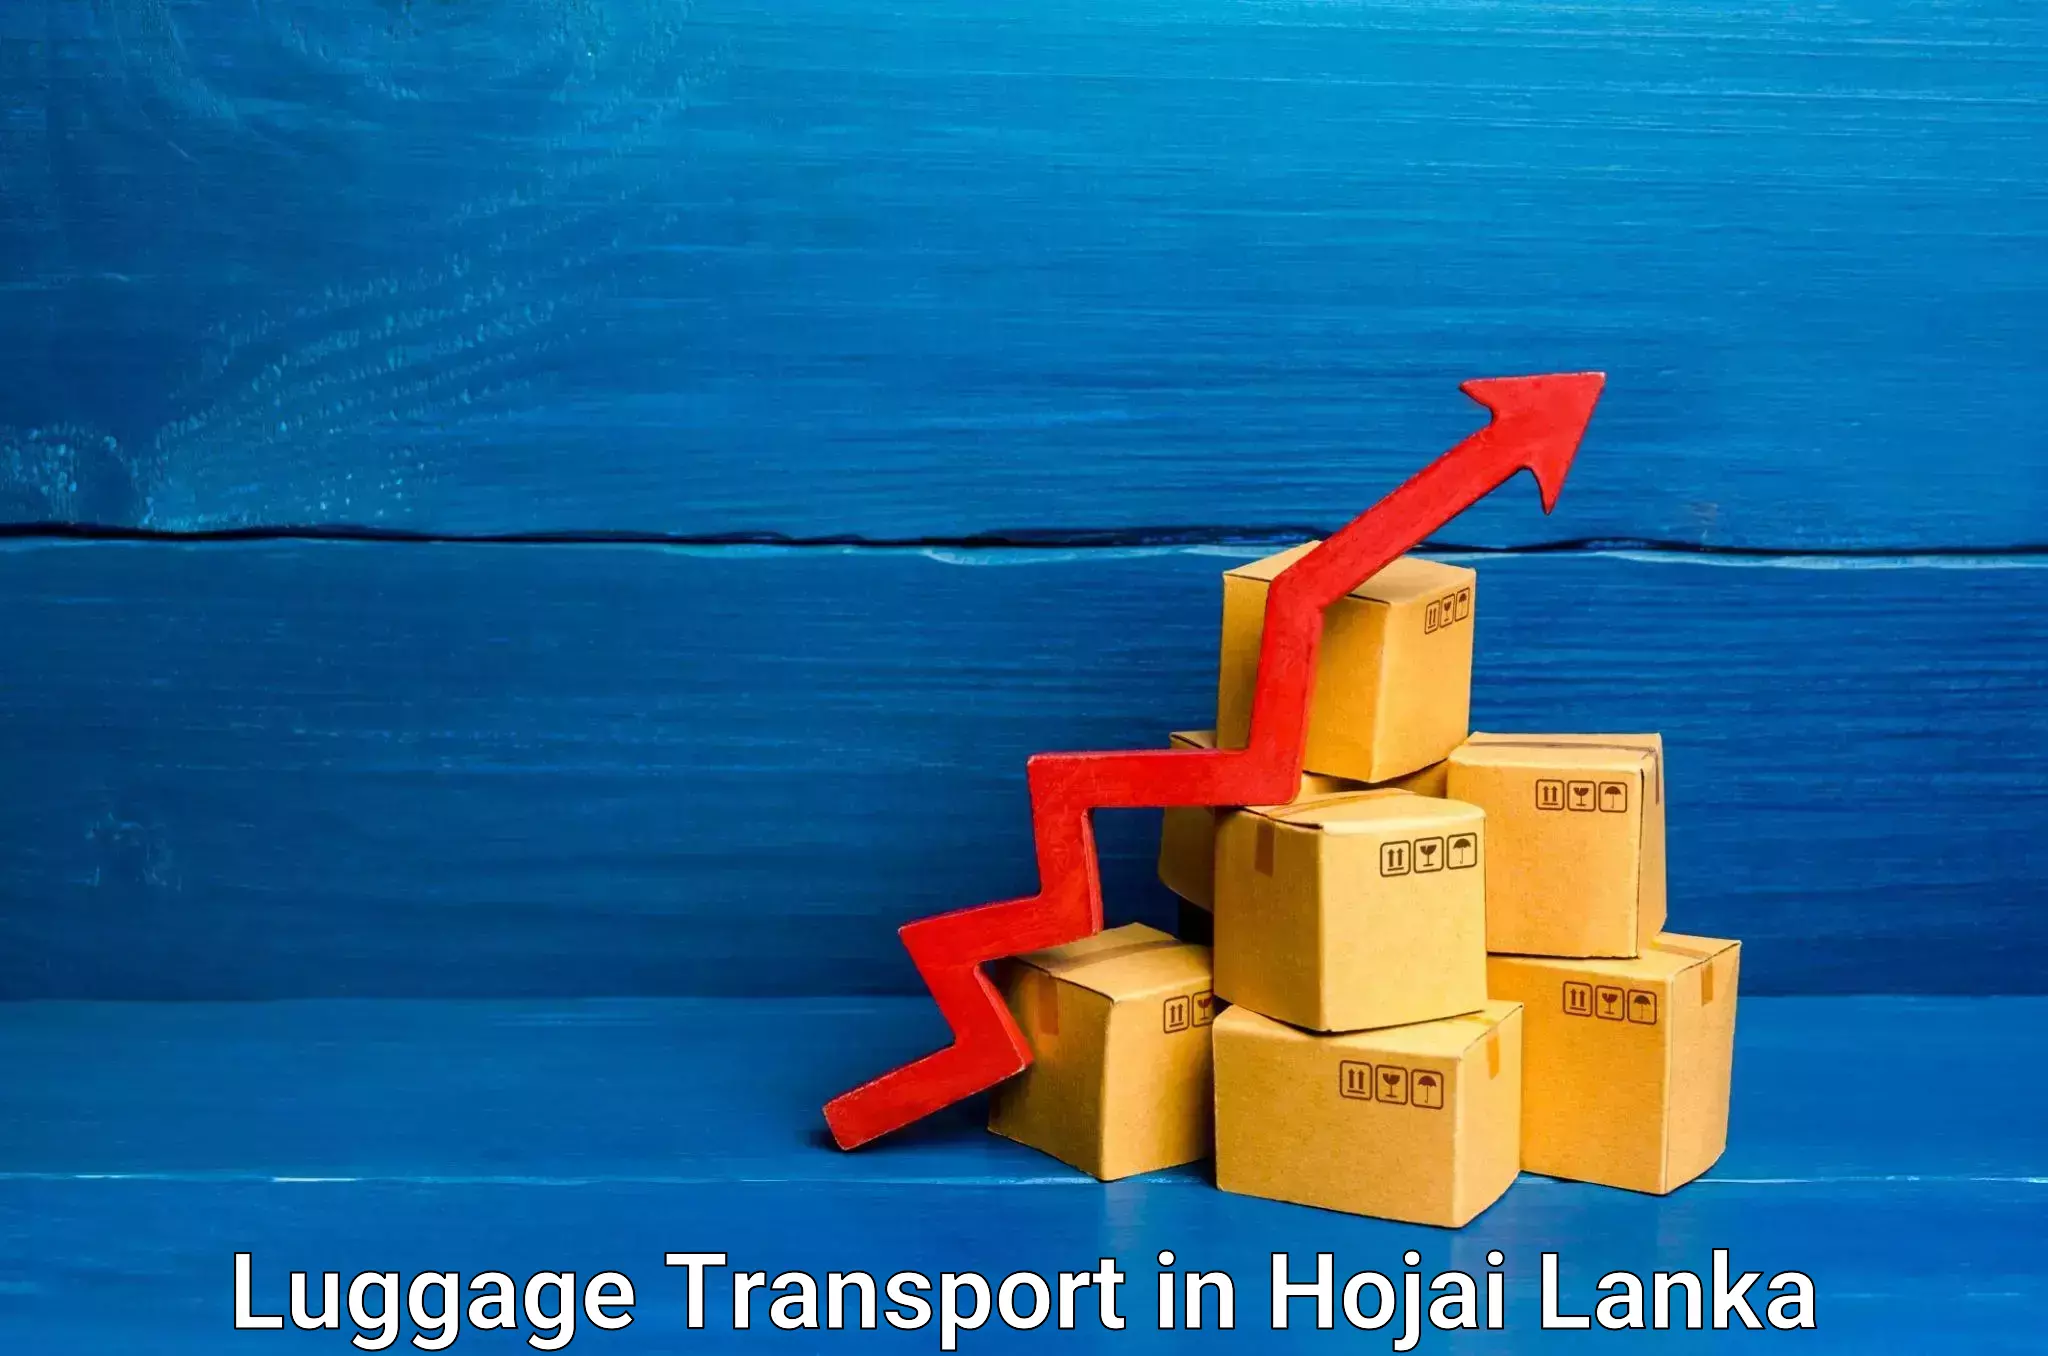 Luggage delivery app in Hojai Lanka